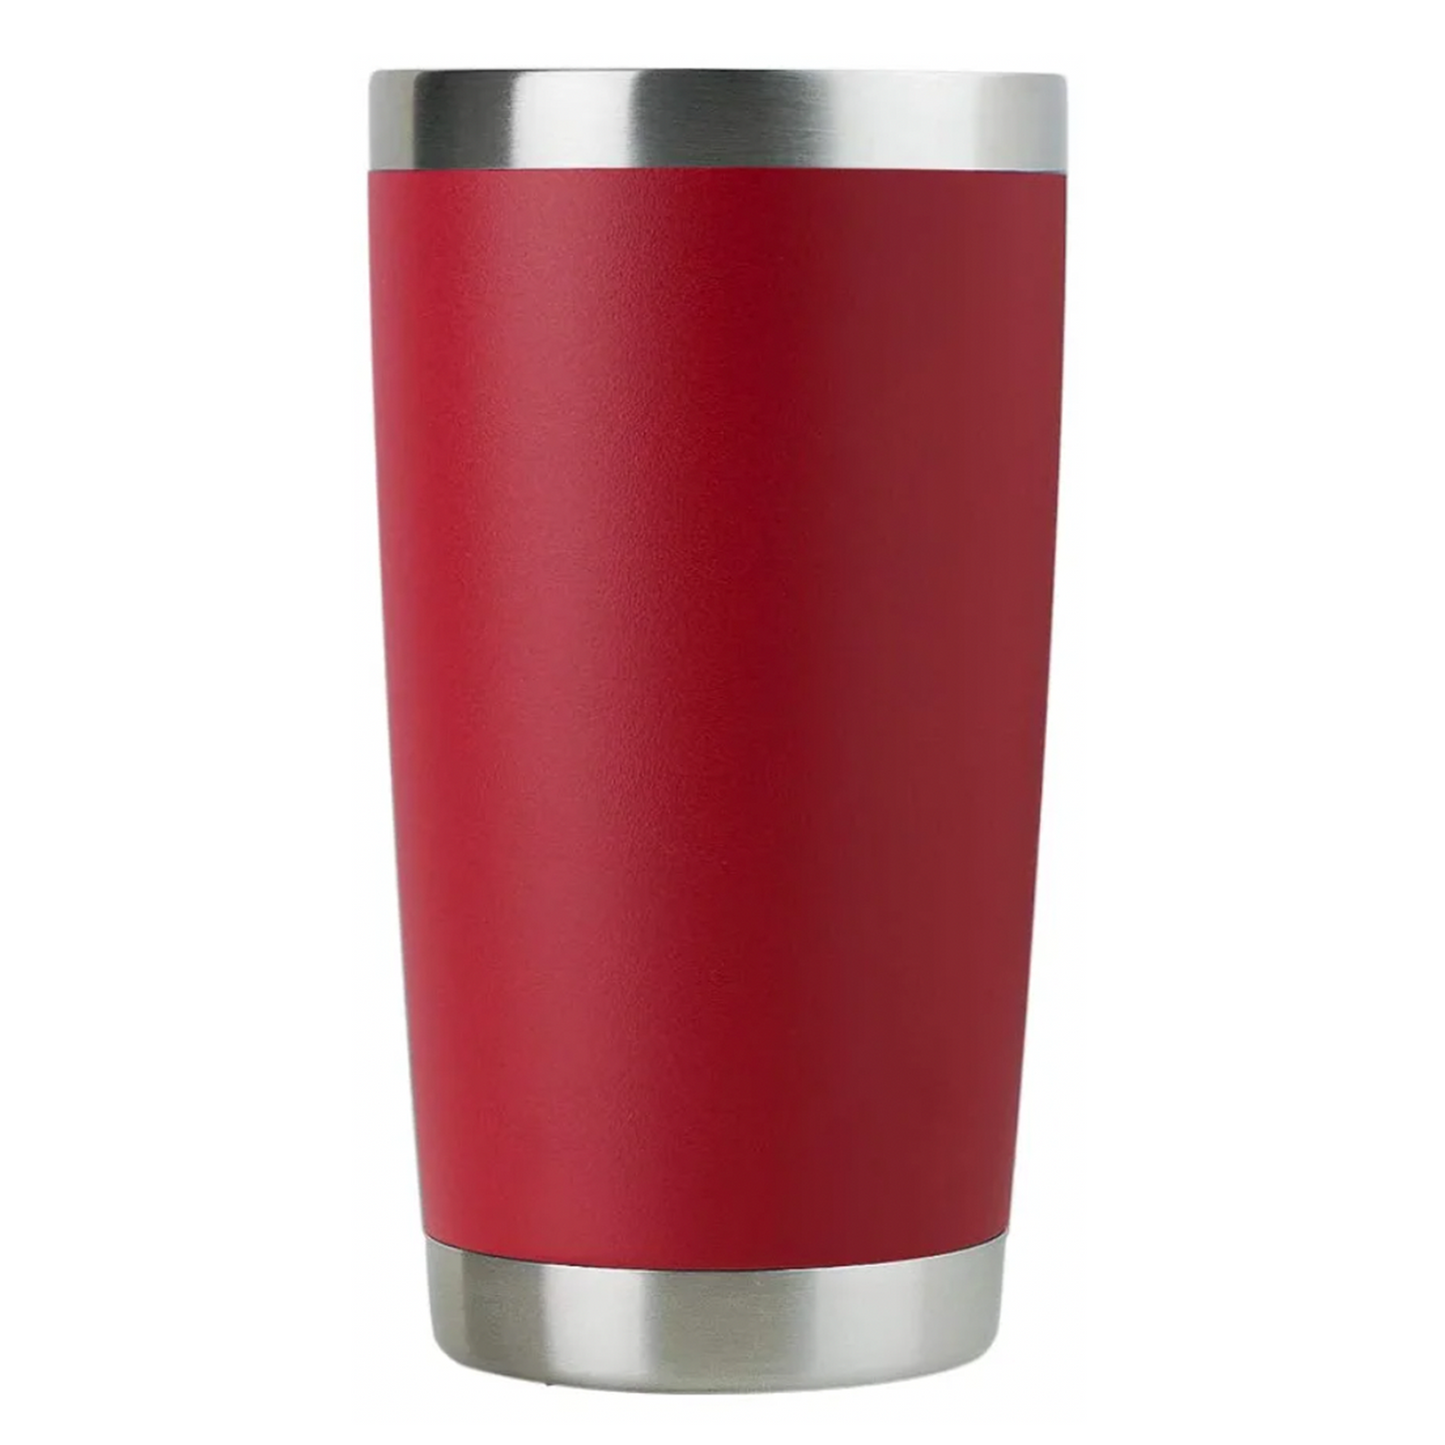 "Let's Keep the Dumbfuckery to a Minimum Today" funny insulated  travel mug - River Barn Designs